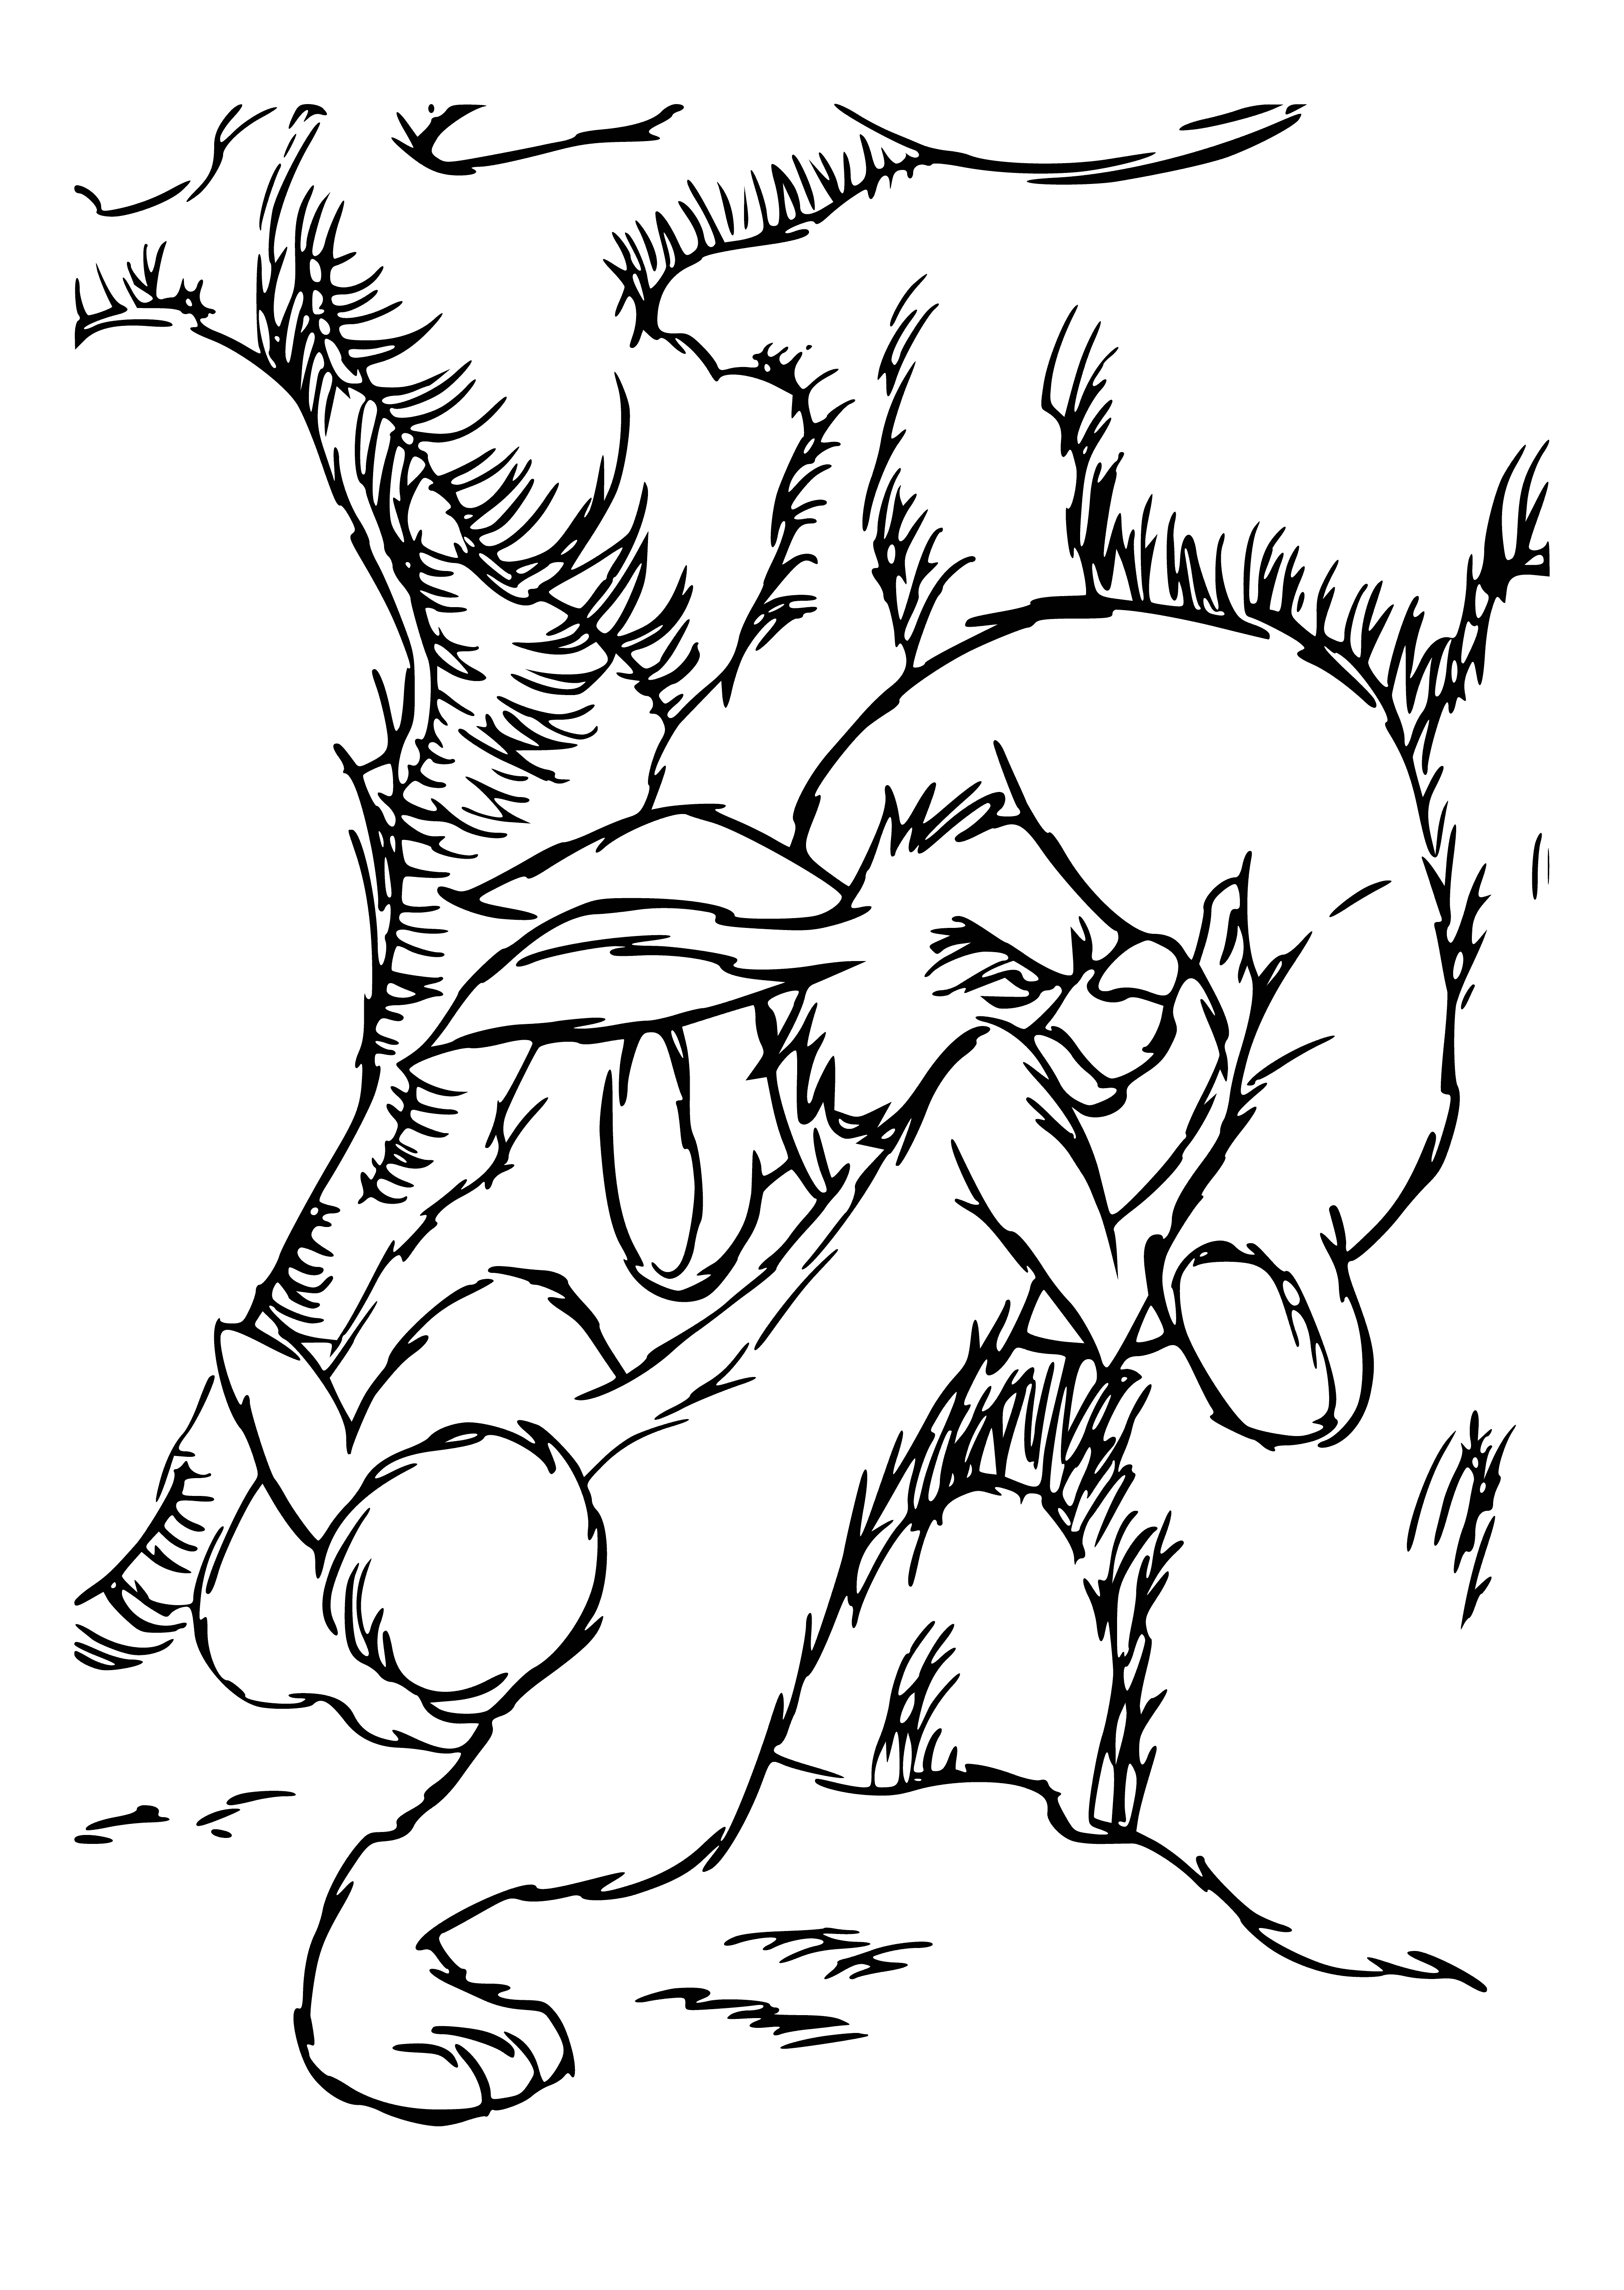 coloring page: Winnie the Pooh is stuck in a beehive with a pot of honey and a bee hovering around him.